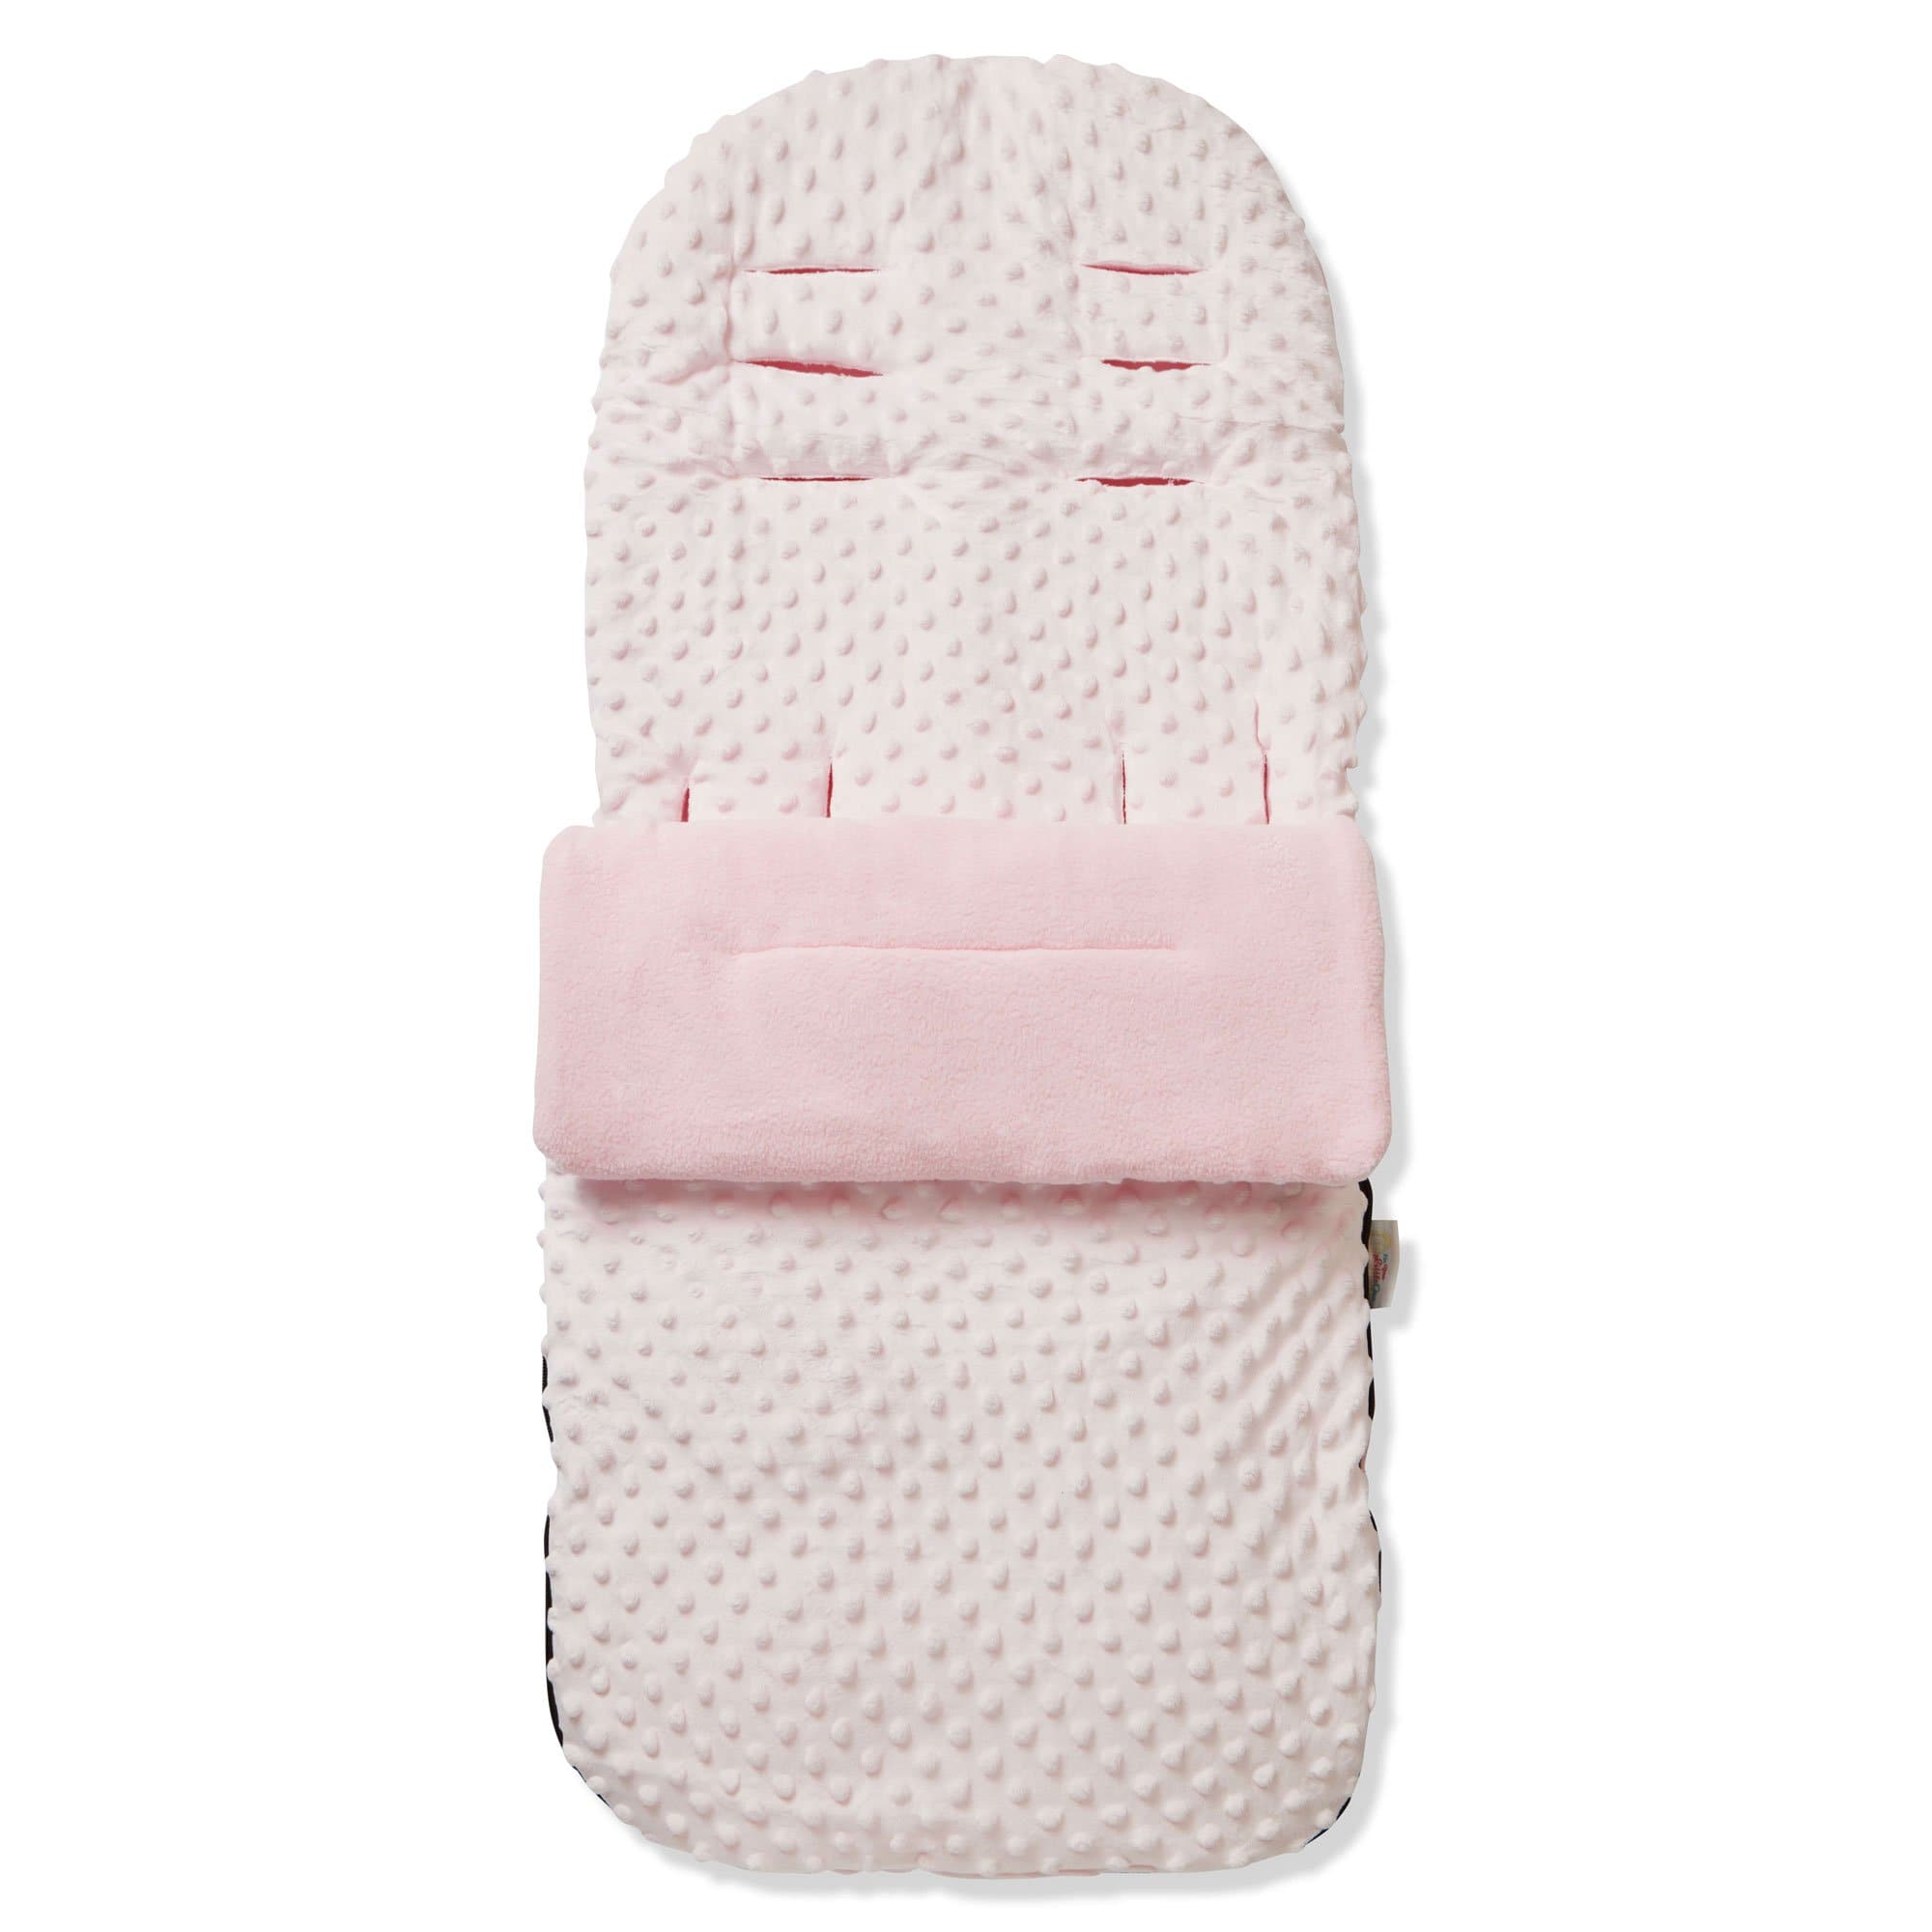 Dimple Footmuff / Cosy Toes Compatible with BabyCare - Pink / Fits All Models | For Your Little One